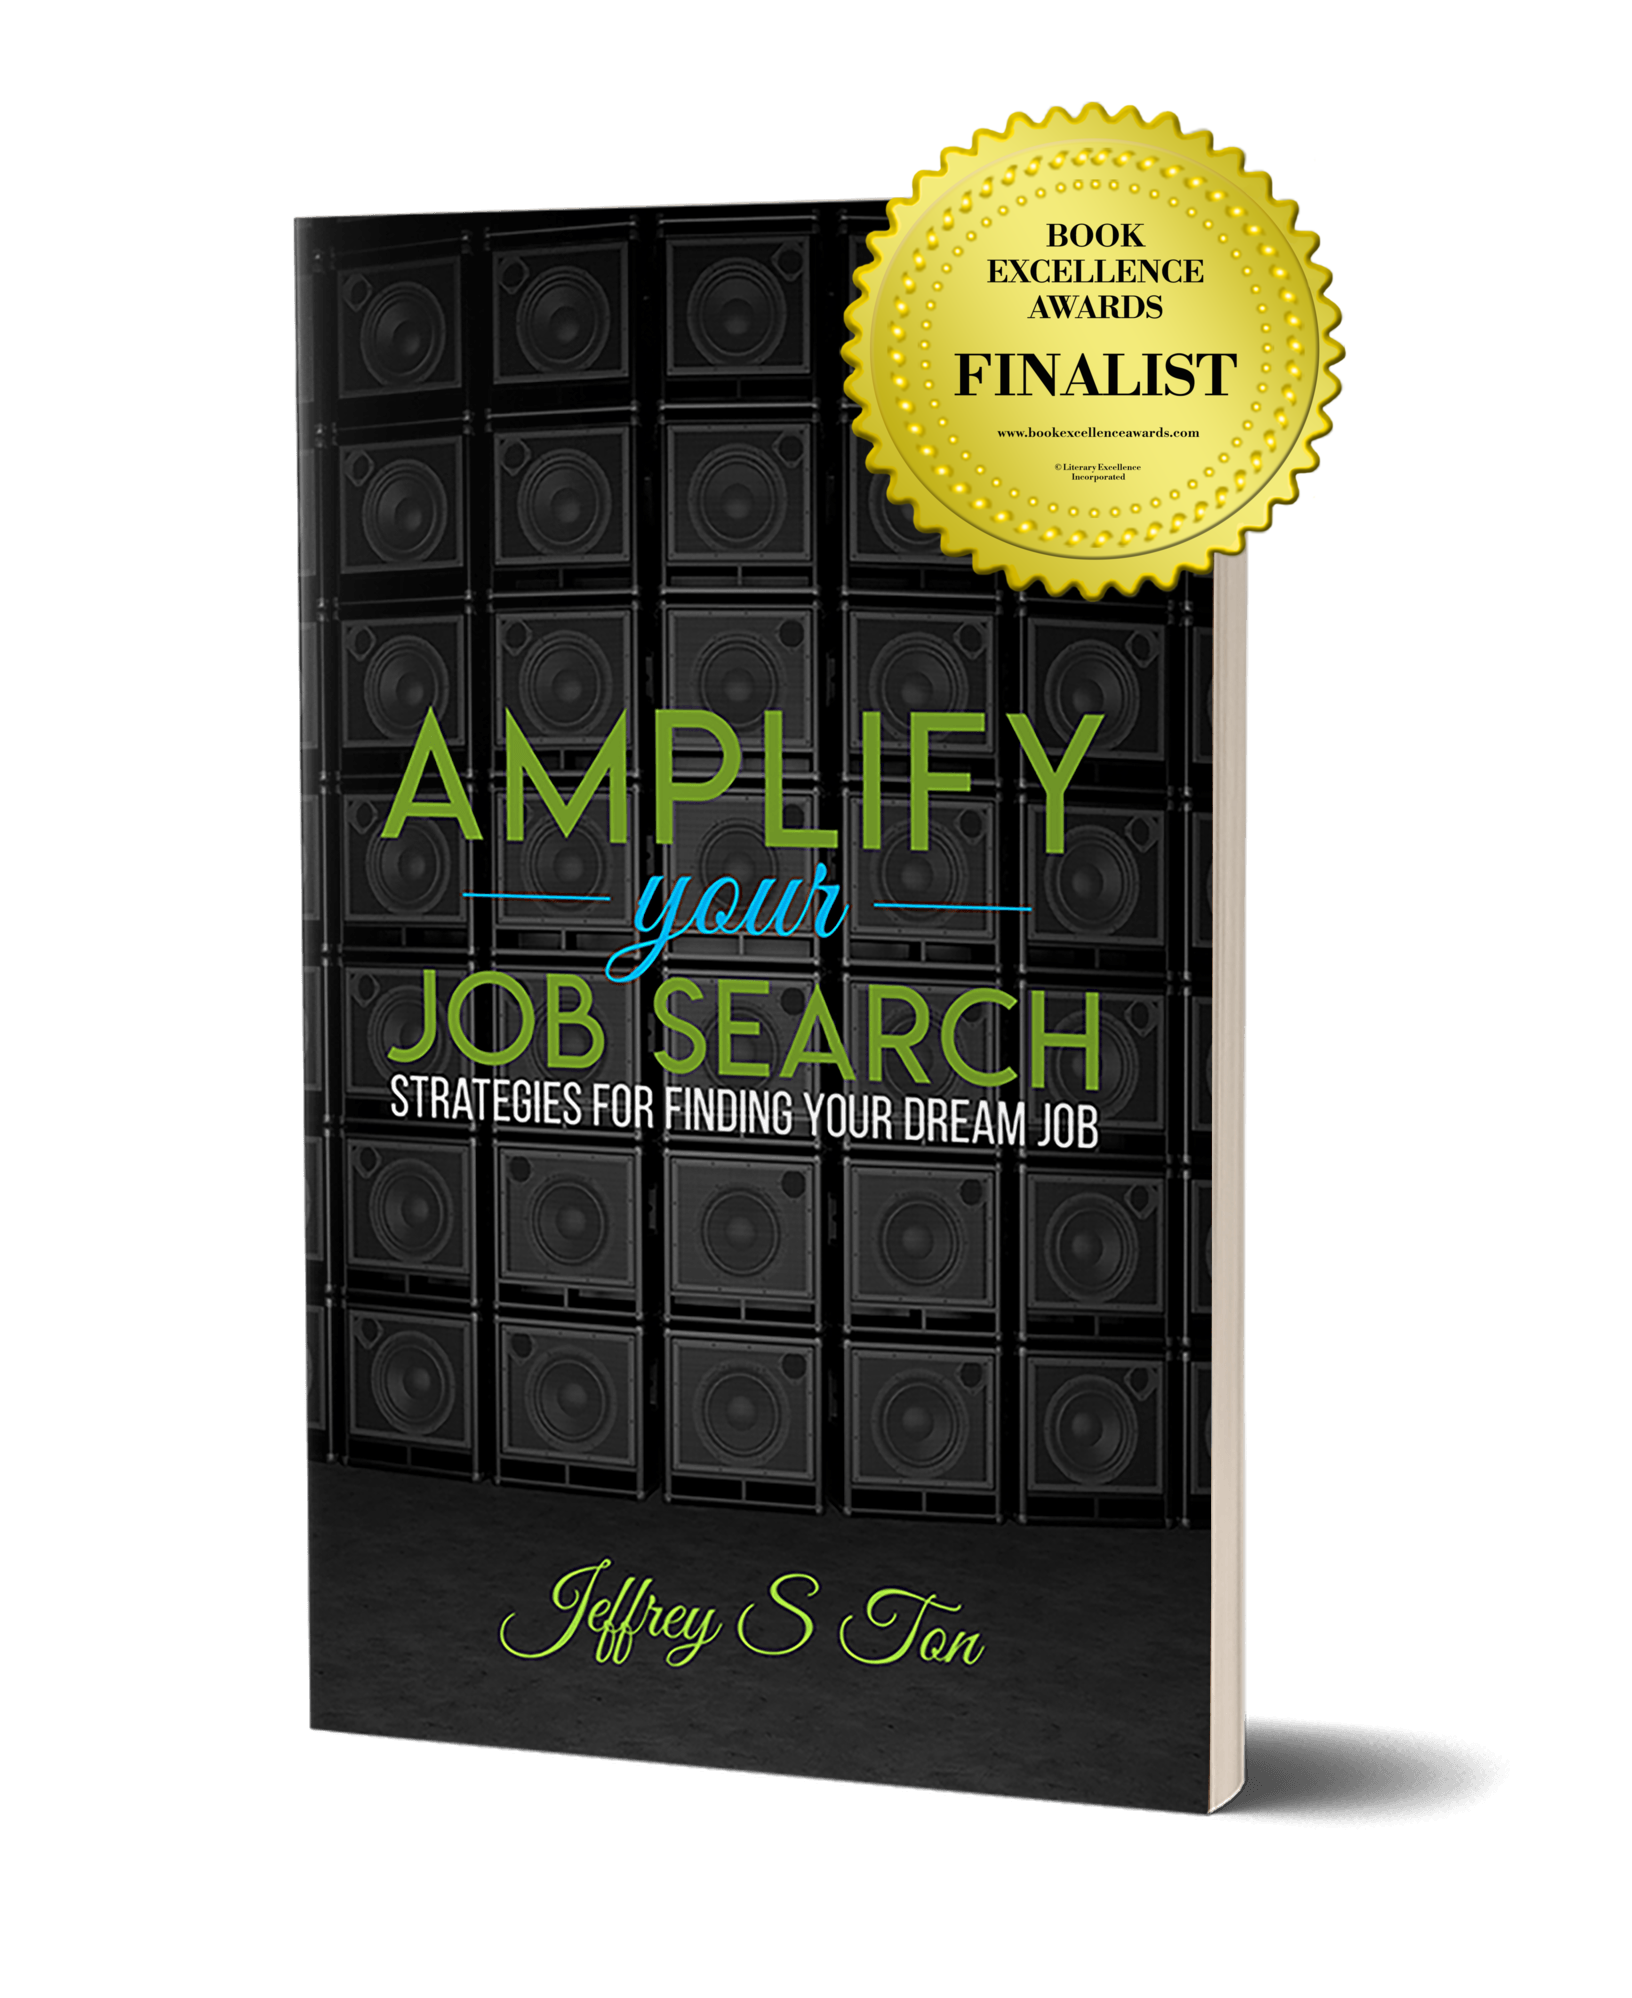 Amplify Your Job Search - Book Excellence Award Finalist